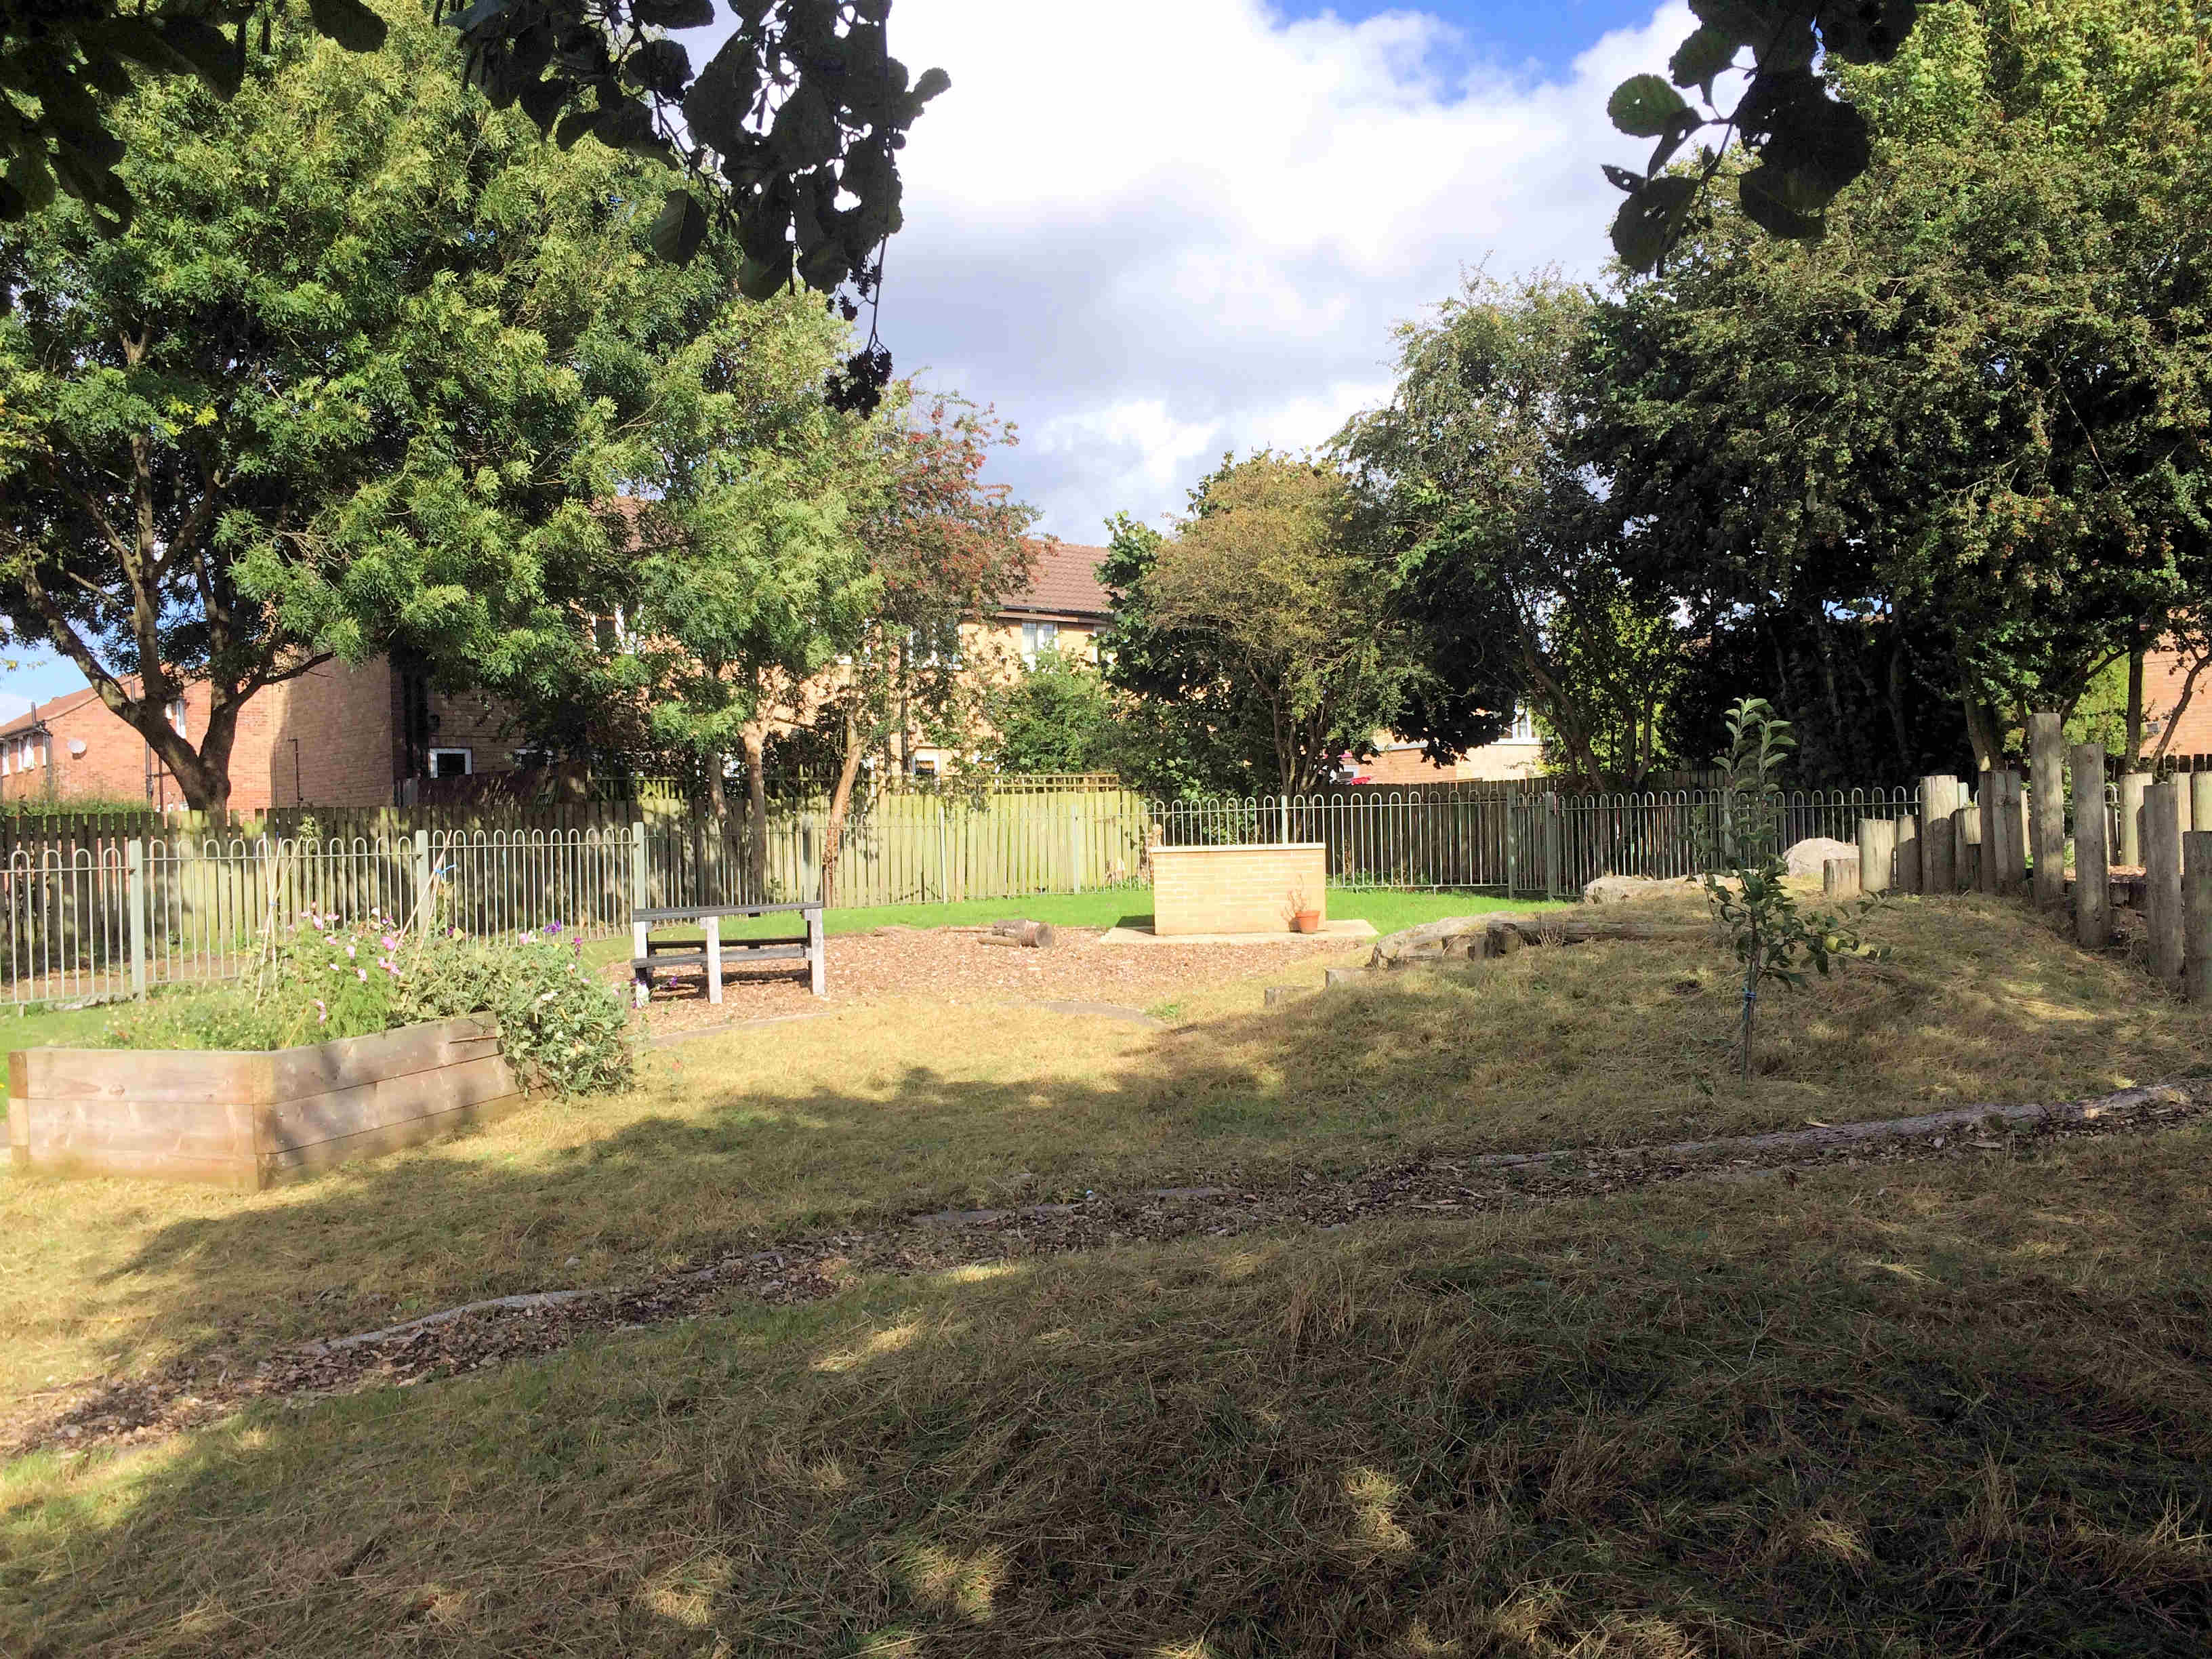 The grass has been cut at the Foxwood Community Centre. Residents meet every Saturday to undertake garden maintenance tasks near the centre